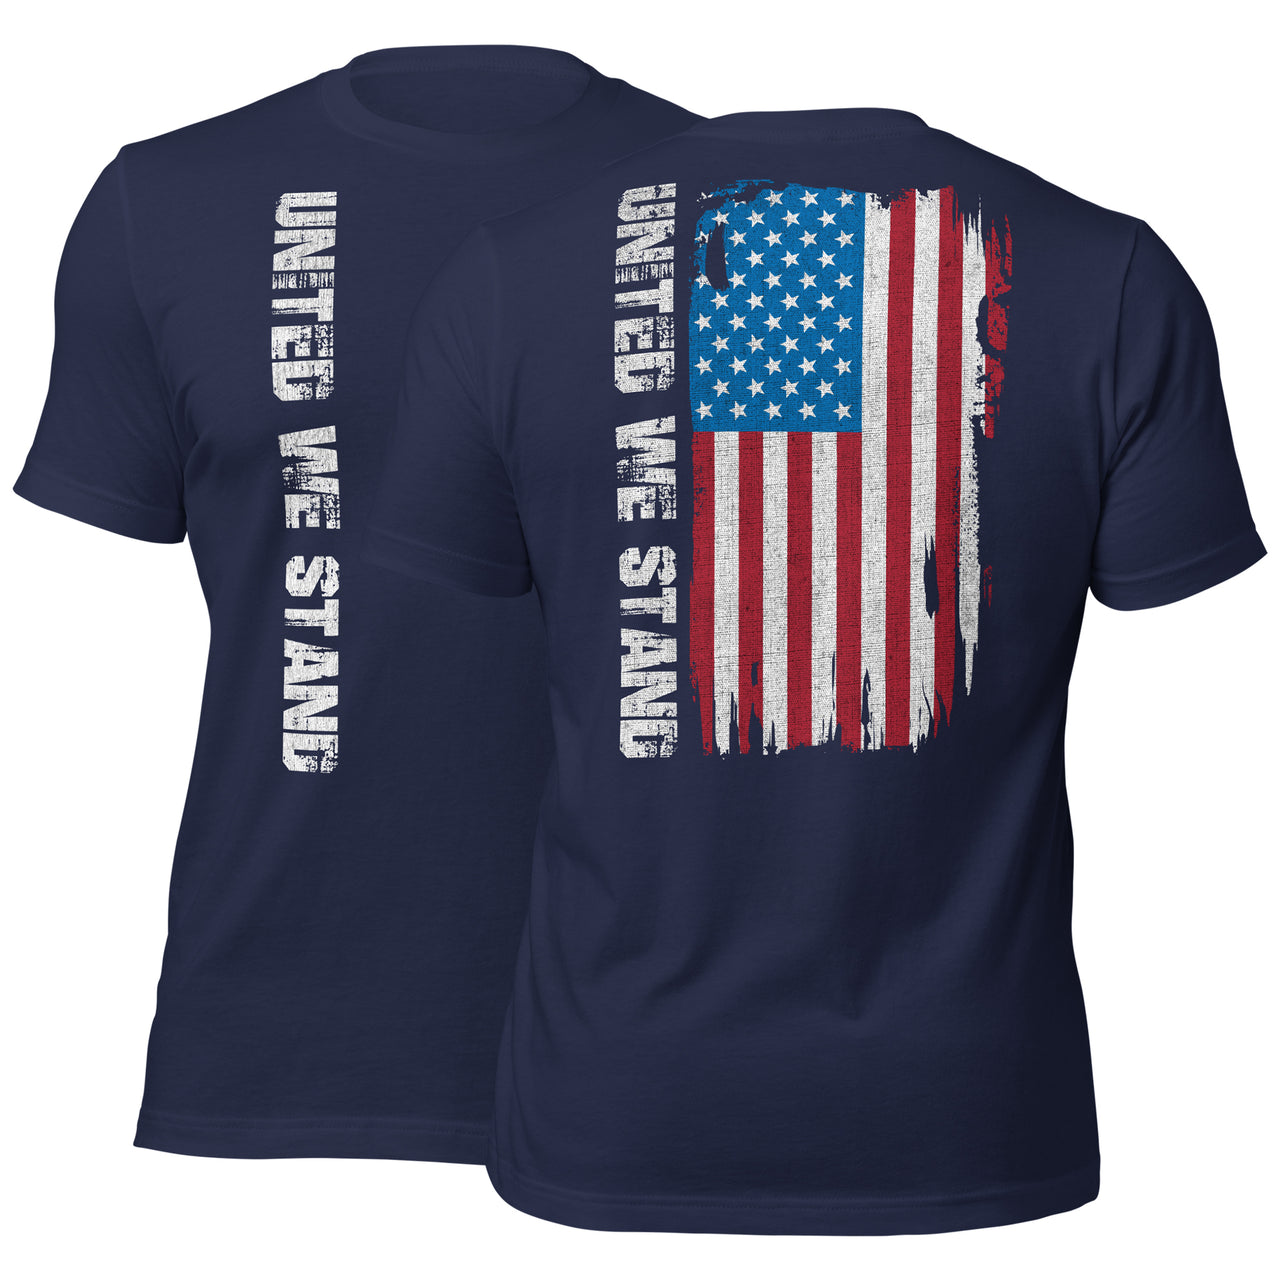 United We Stand Full Color American Flag T-Shirt in navy